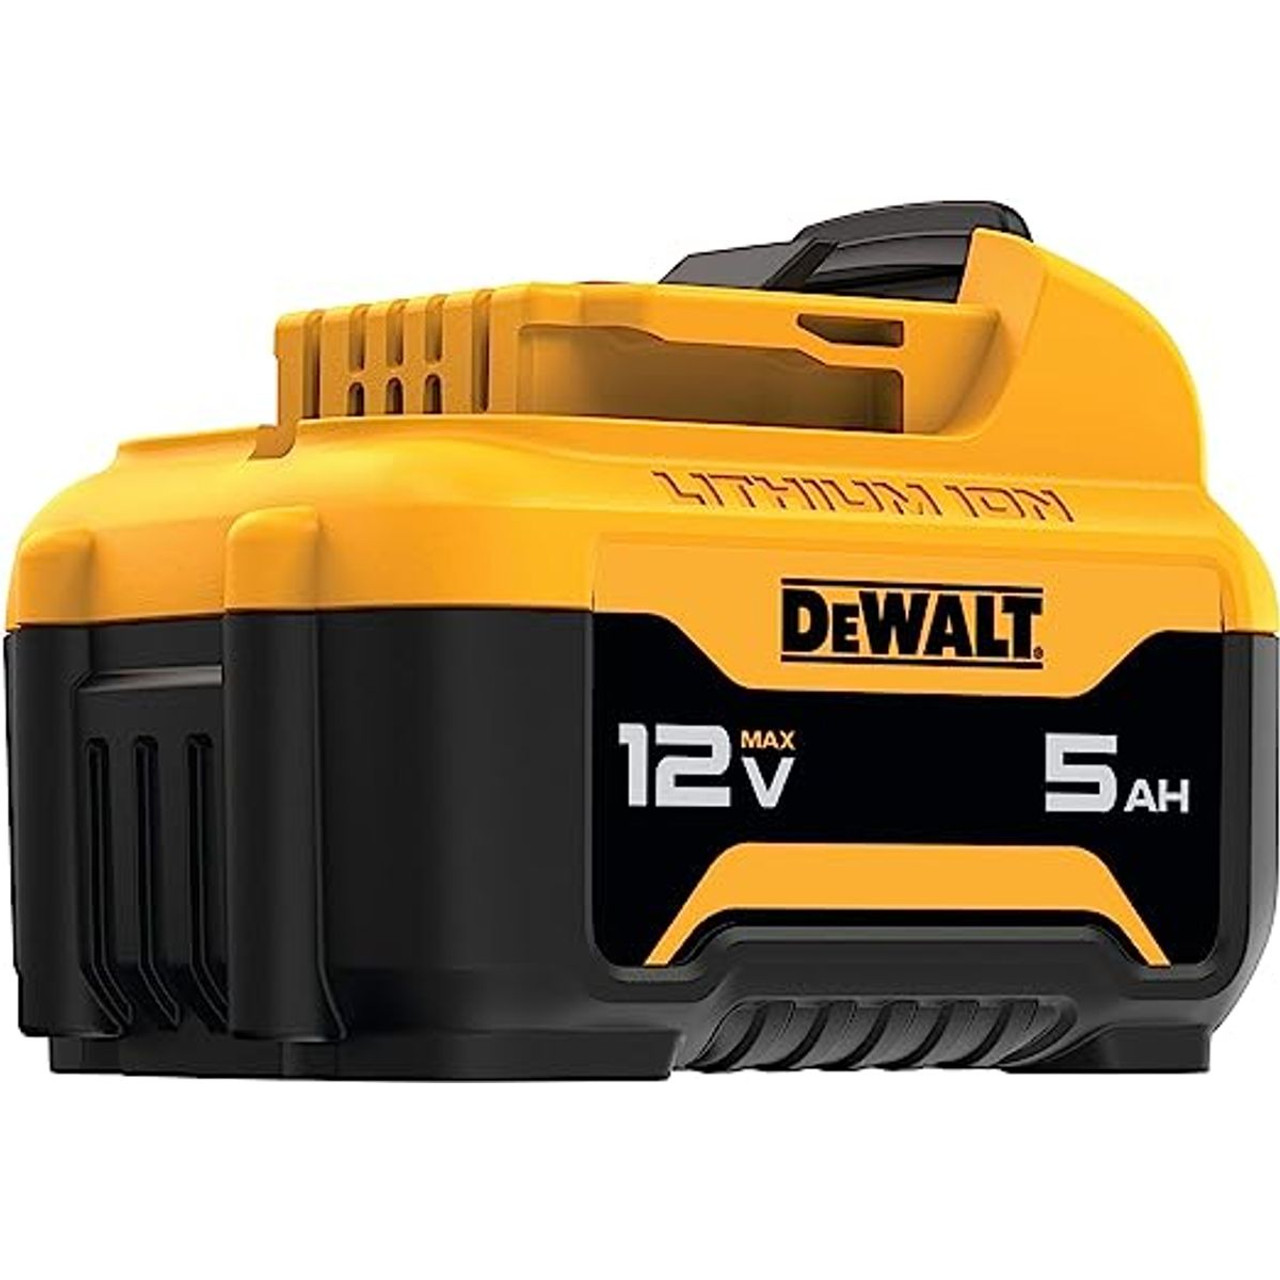 DEWALT 12V MAX Lithium-Ion Battery with 5.0Ah Capacity product image